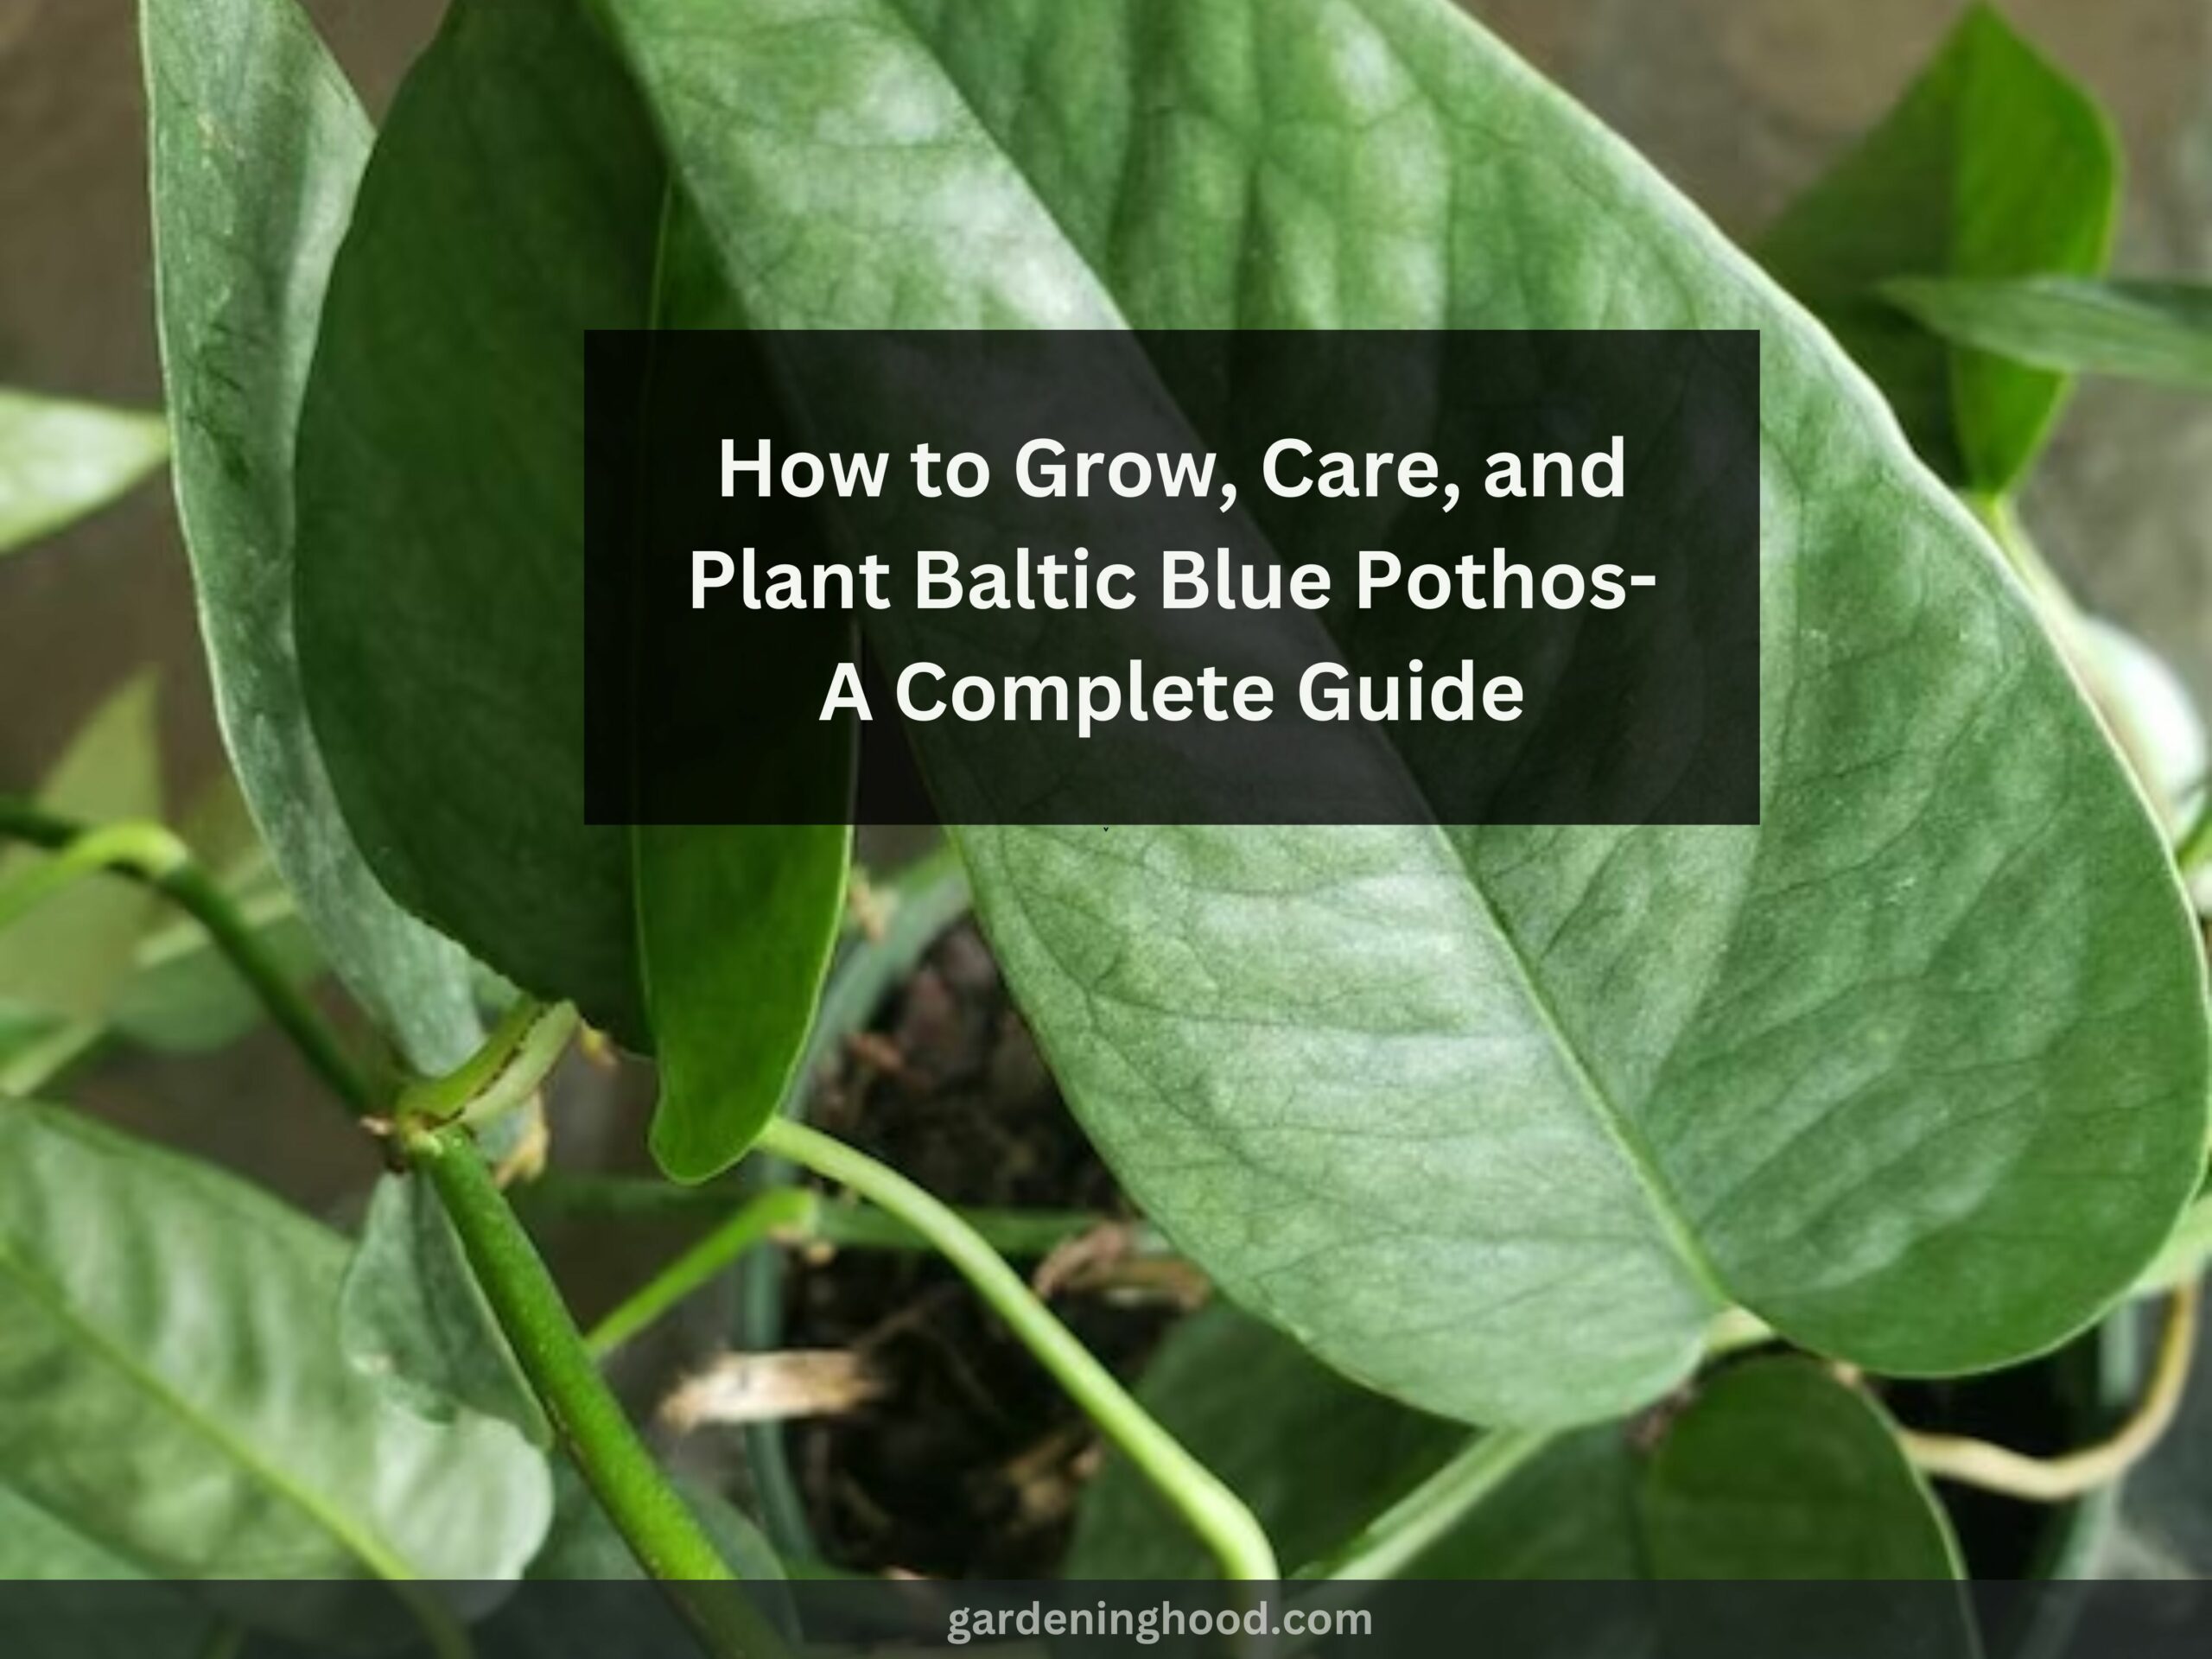 How to Grow, Care, and Plant Baltic Blue Pothos- A Complete Guide